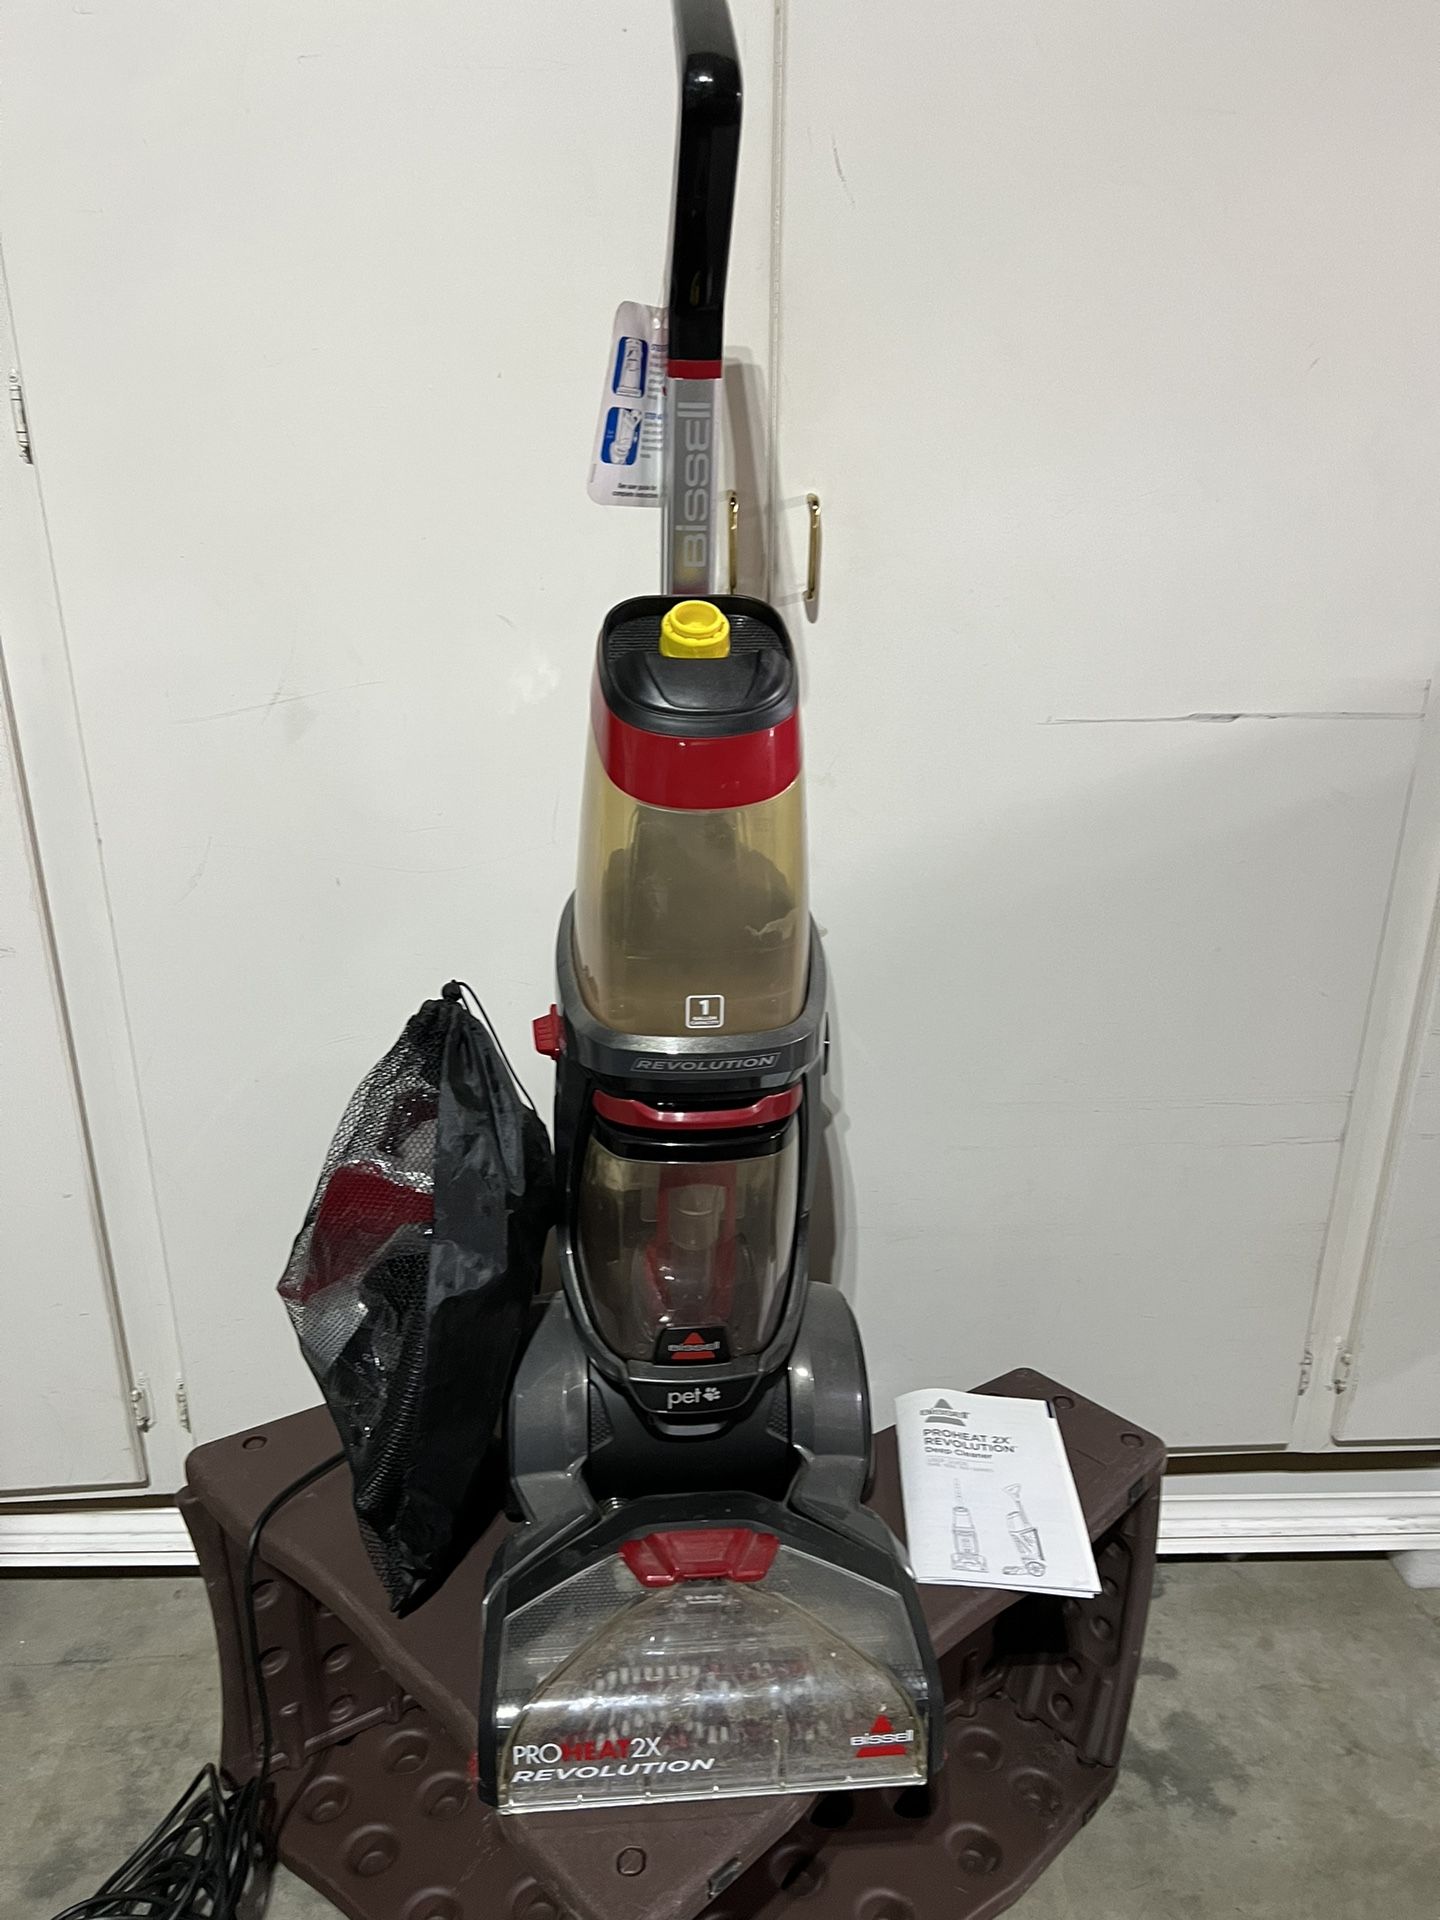 Bissell Pro Heat 2X Pet Carpet and Floor Cleaner